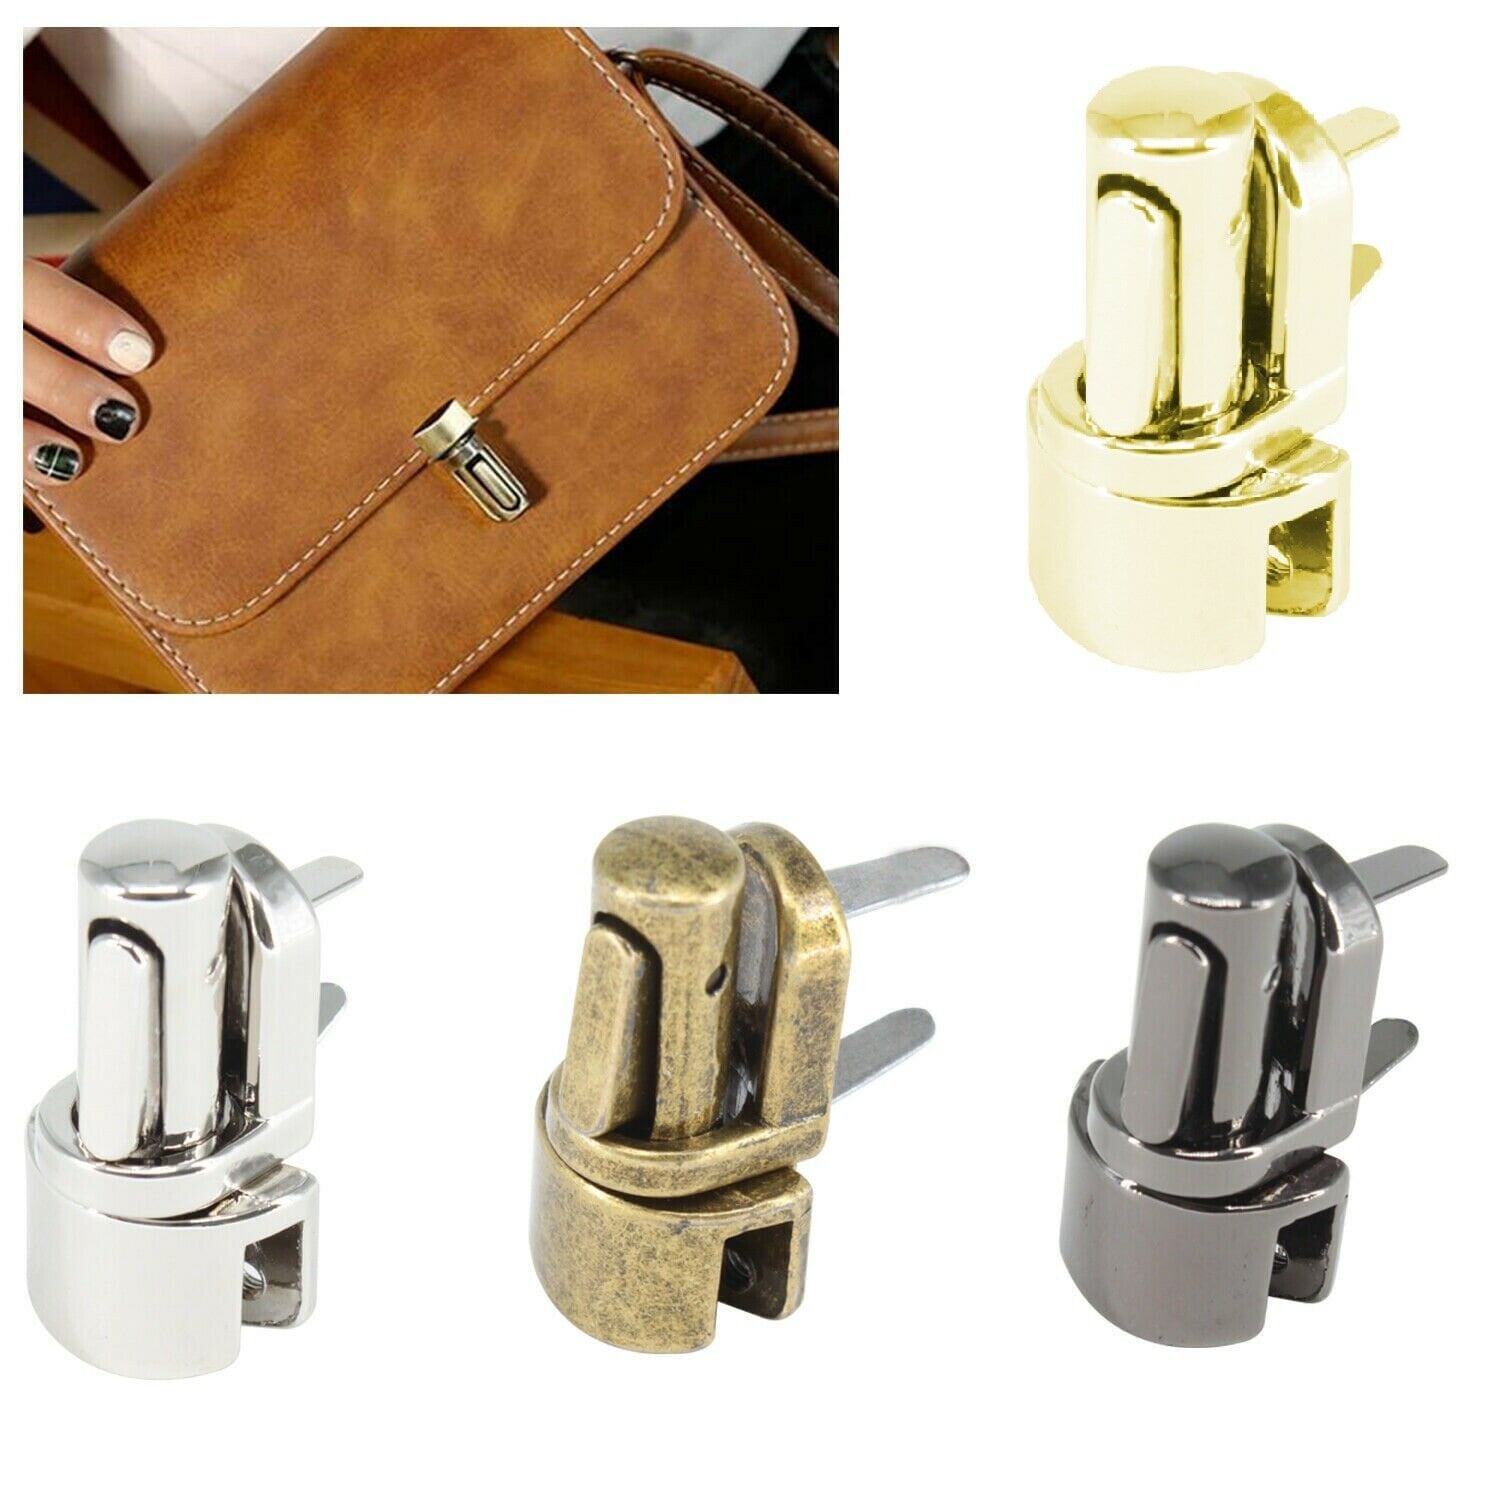 2Pcs DIY Bag Closure Catch Tuck Lock Clasp Fasteners for Leather Craft Metal Silver Round